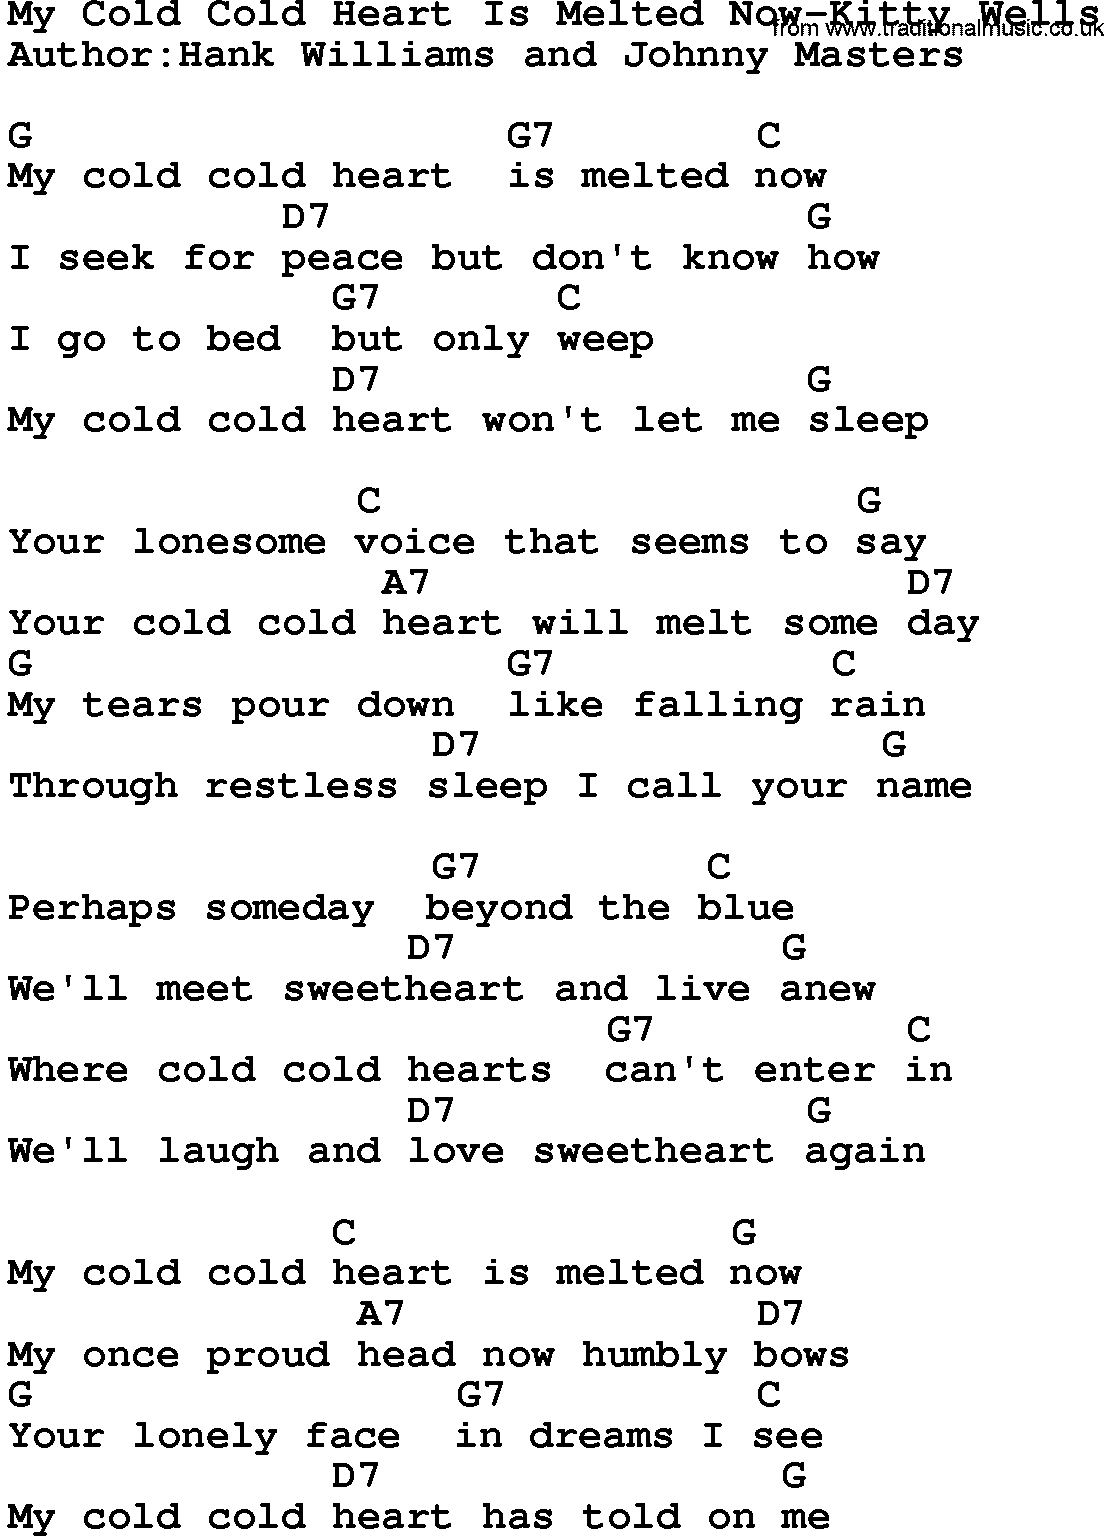 Country music song: My Cold Cold Heart Is Melted Now-Kitty Wells lyrics and chords